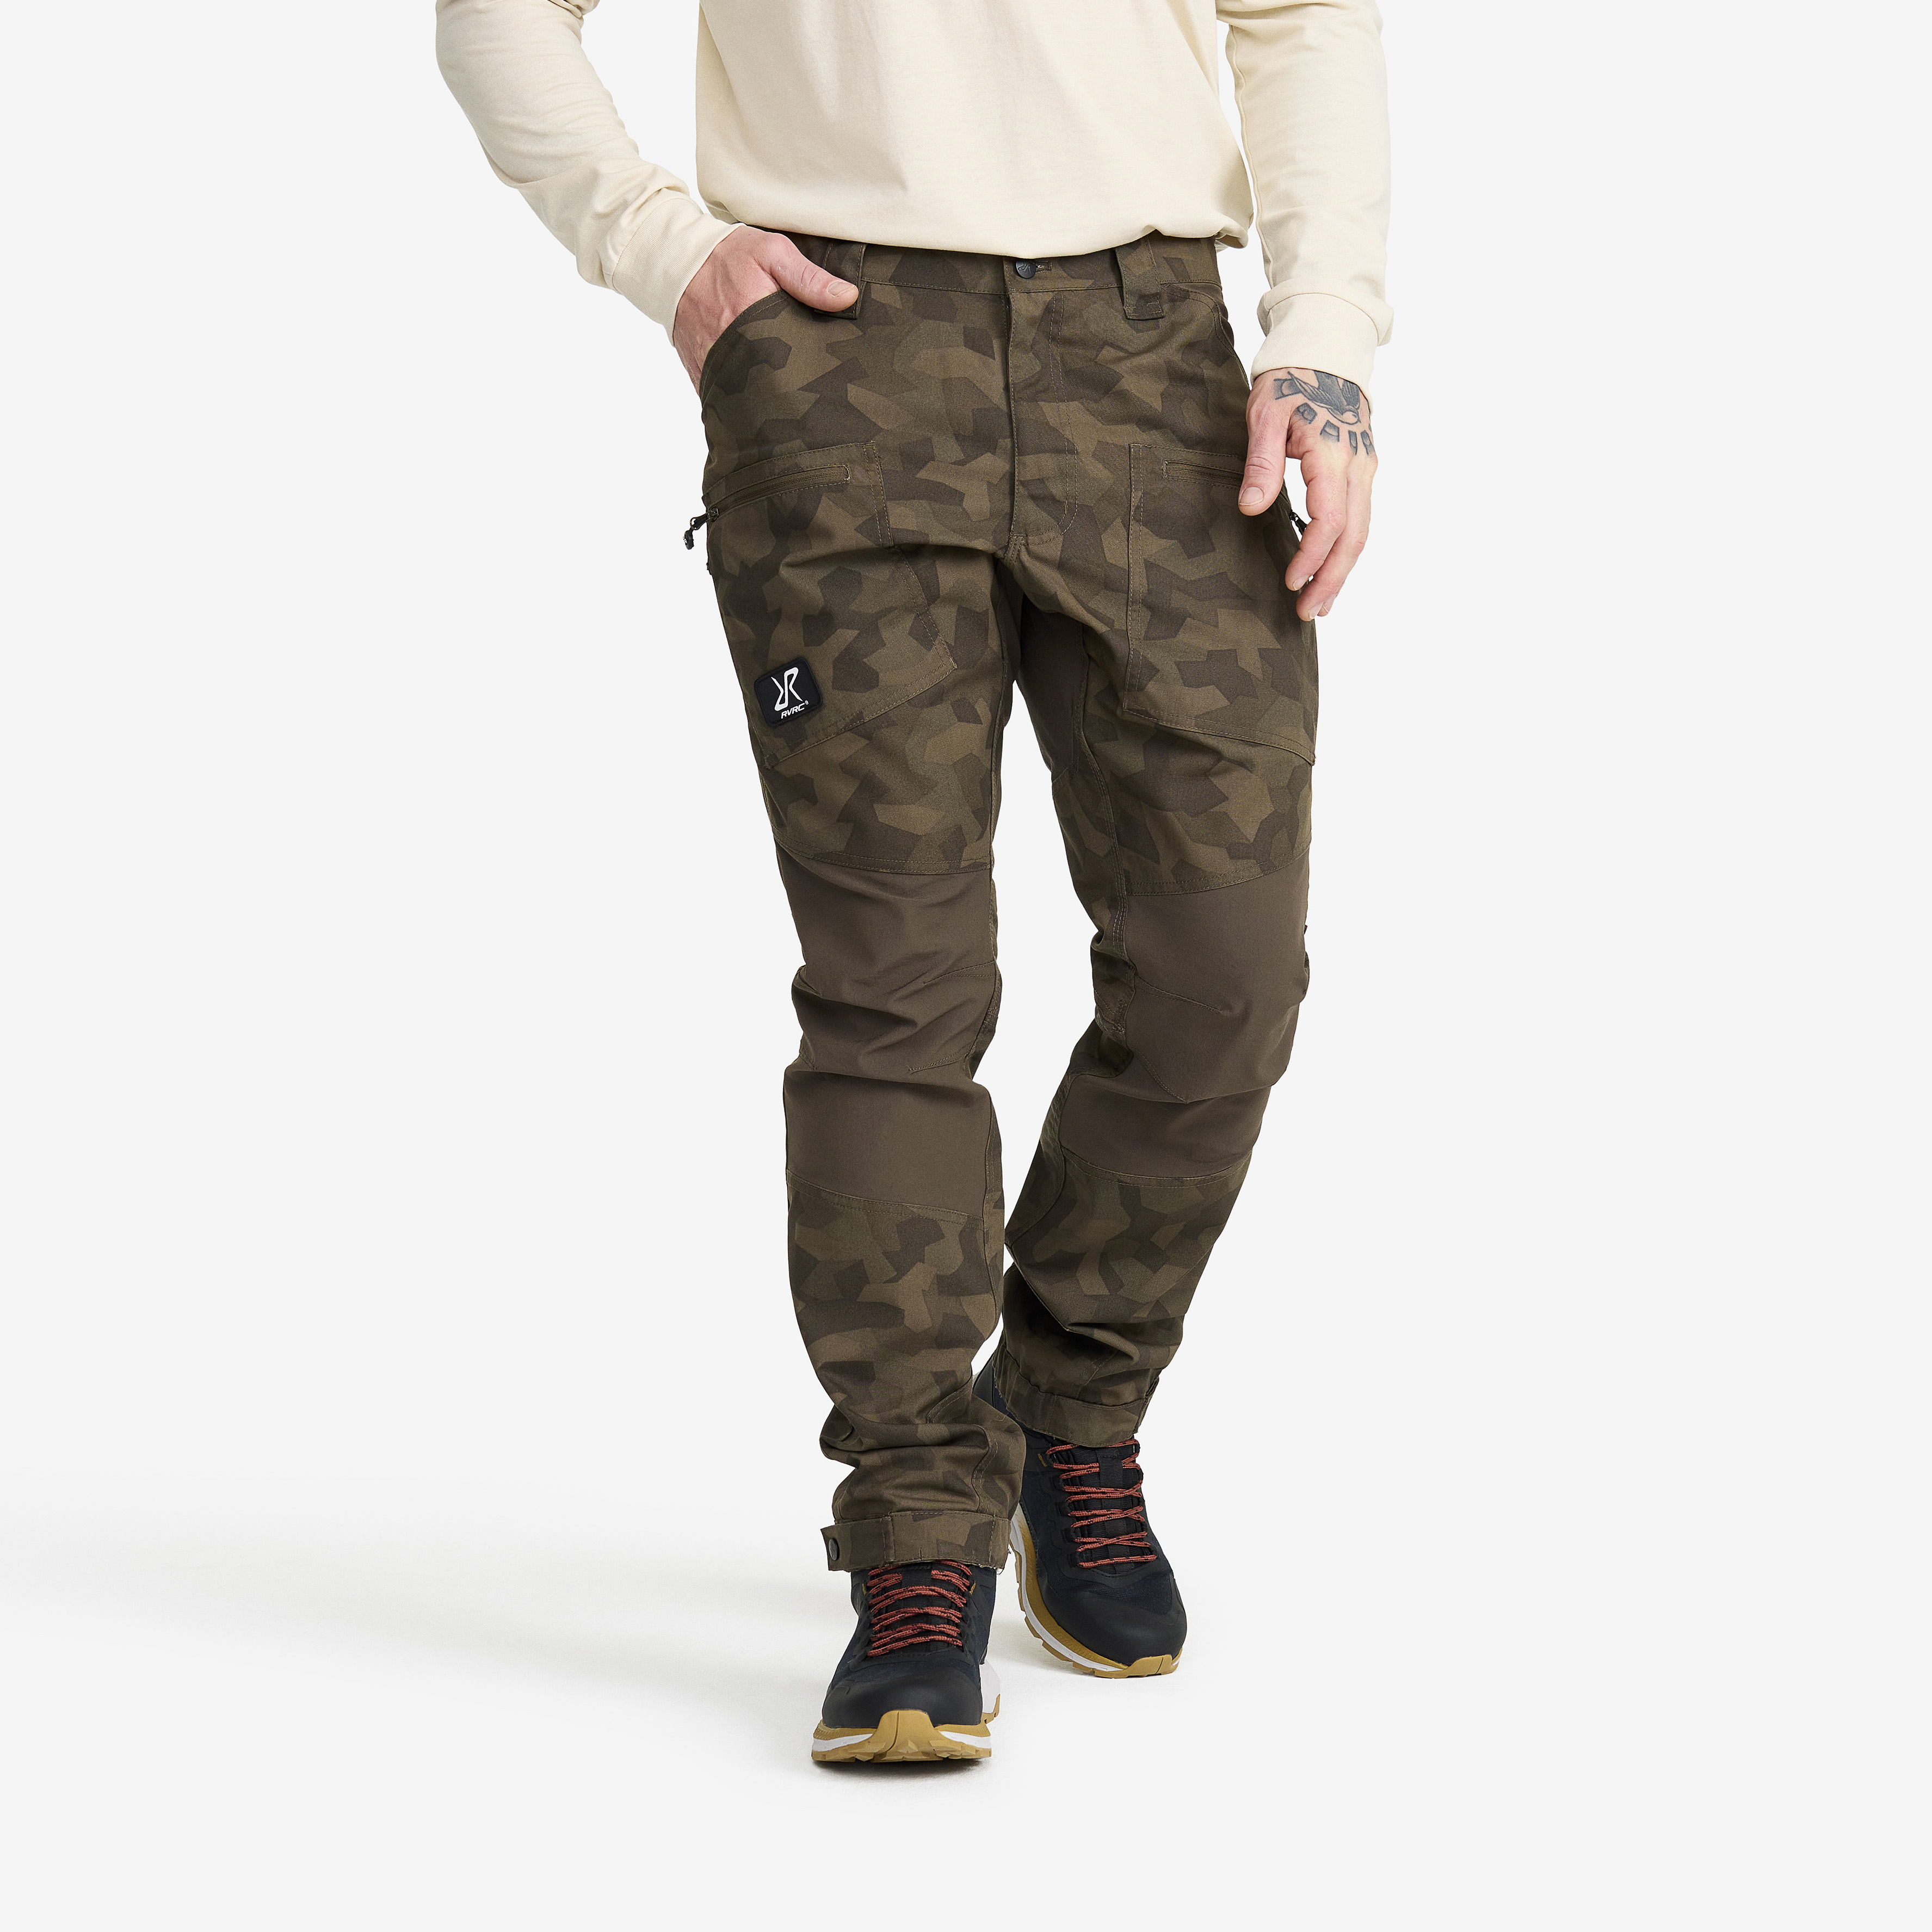 Nordwand Pro hiking pants for men in brown